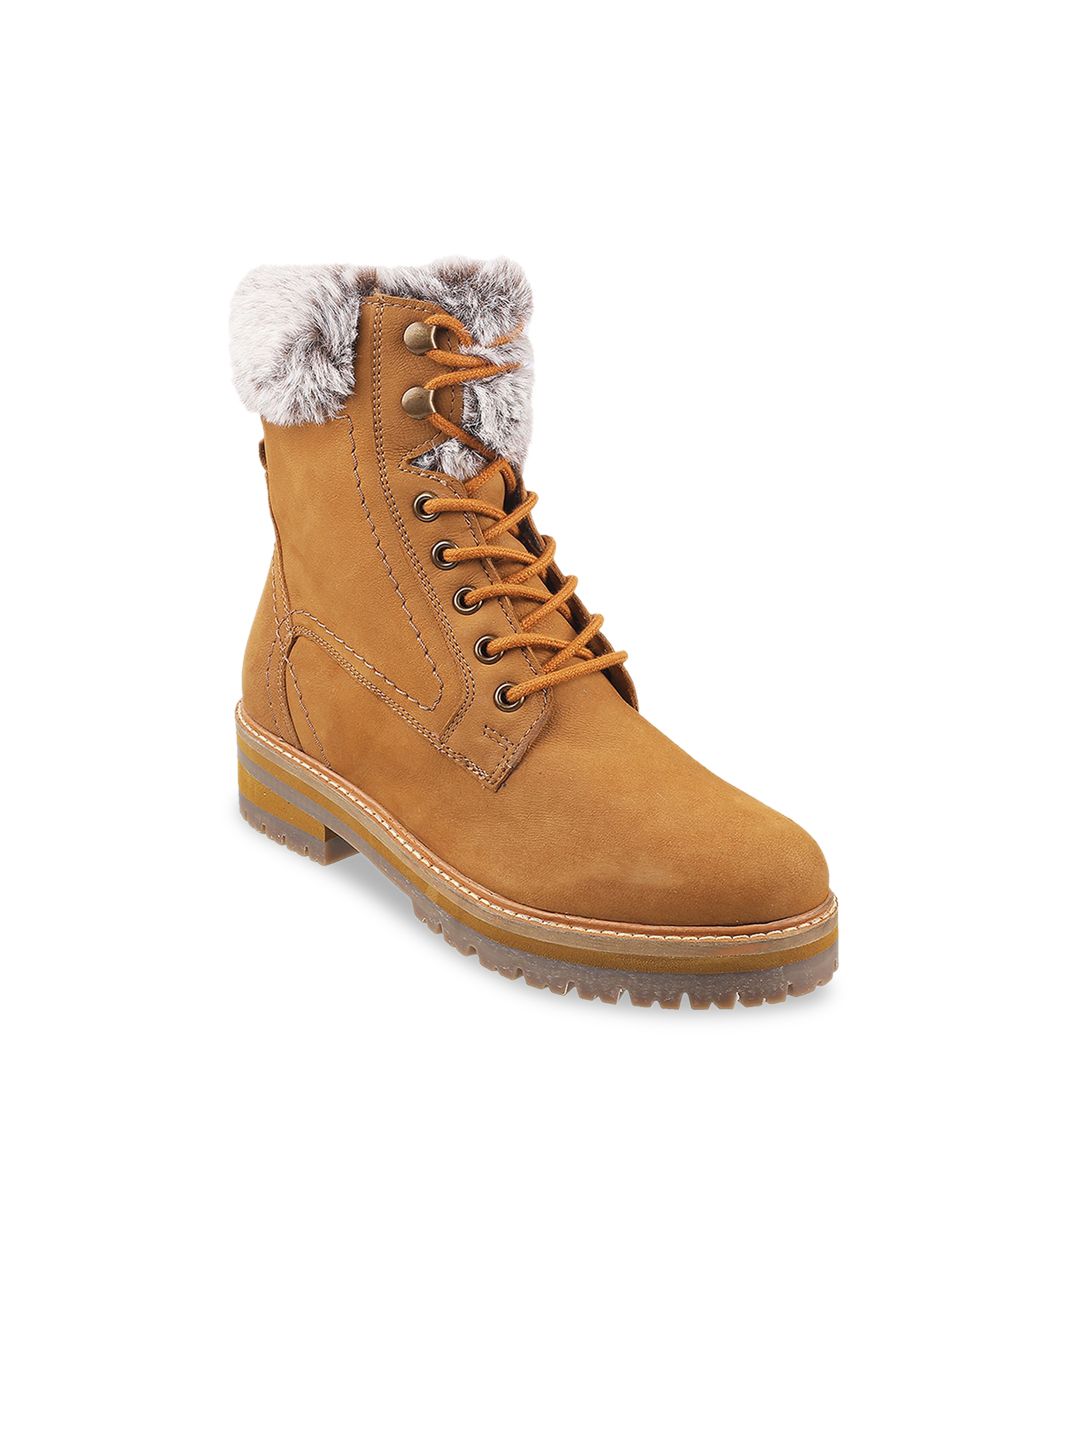 Metro Women Tan Suede High-Top Flat Boots With Faux Fur Price in India